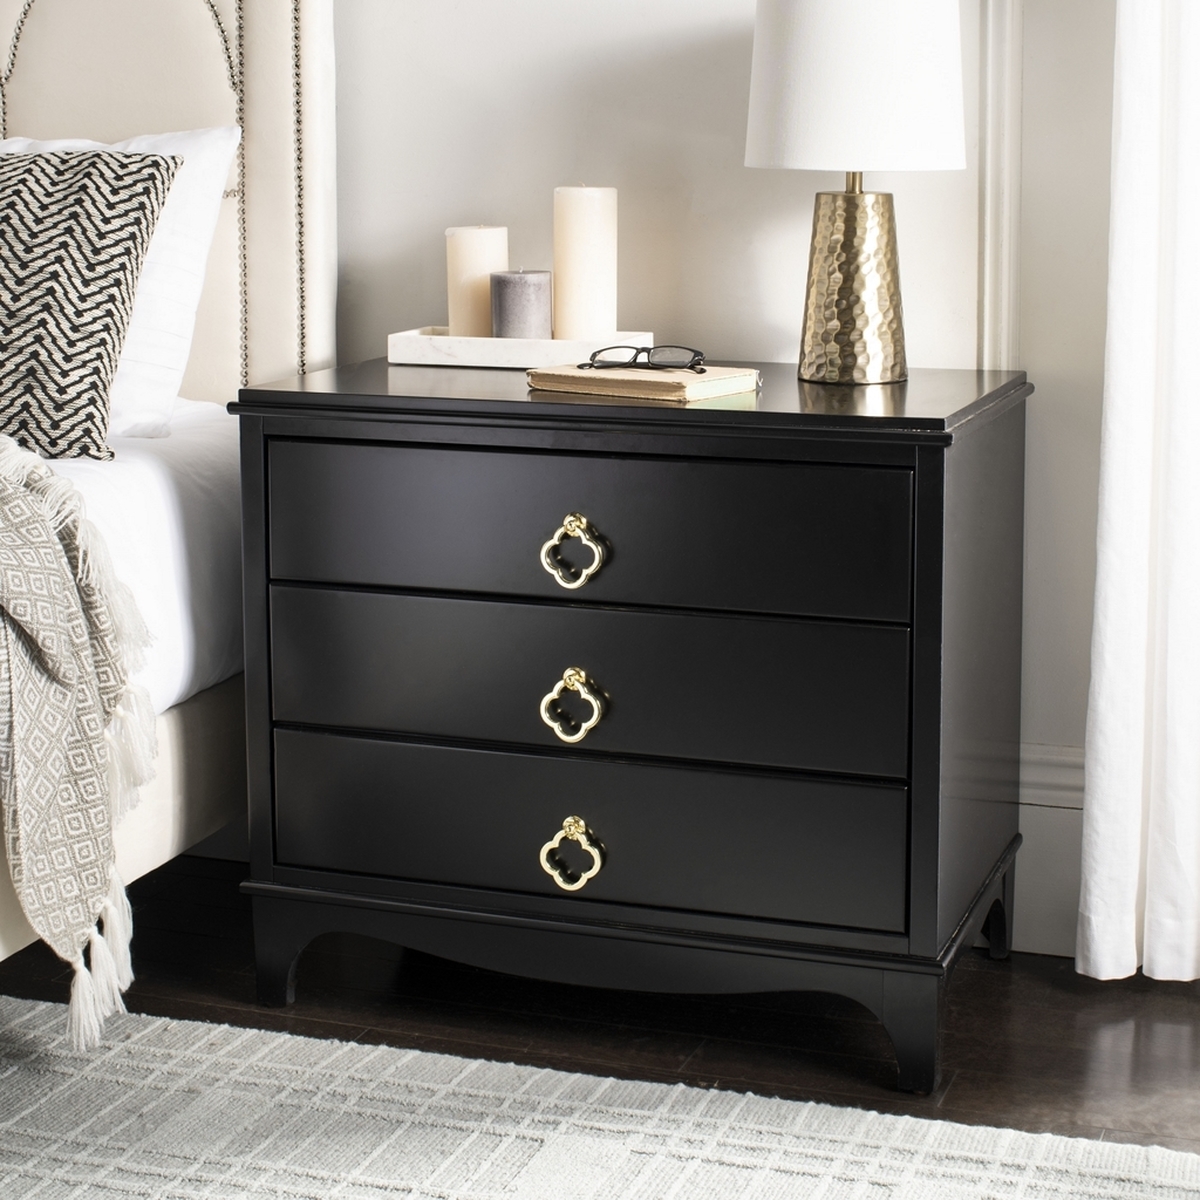 Hannon 3 Drawer Contemporary Nightstand - Black - Arlo Home - Image 1